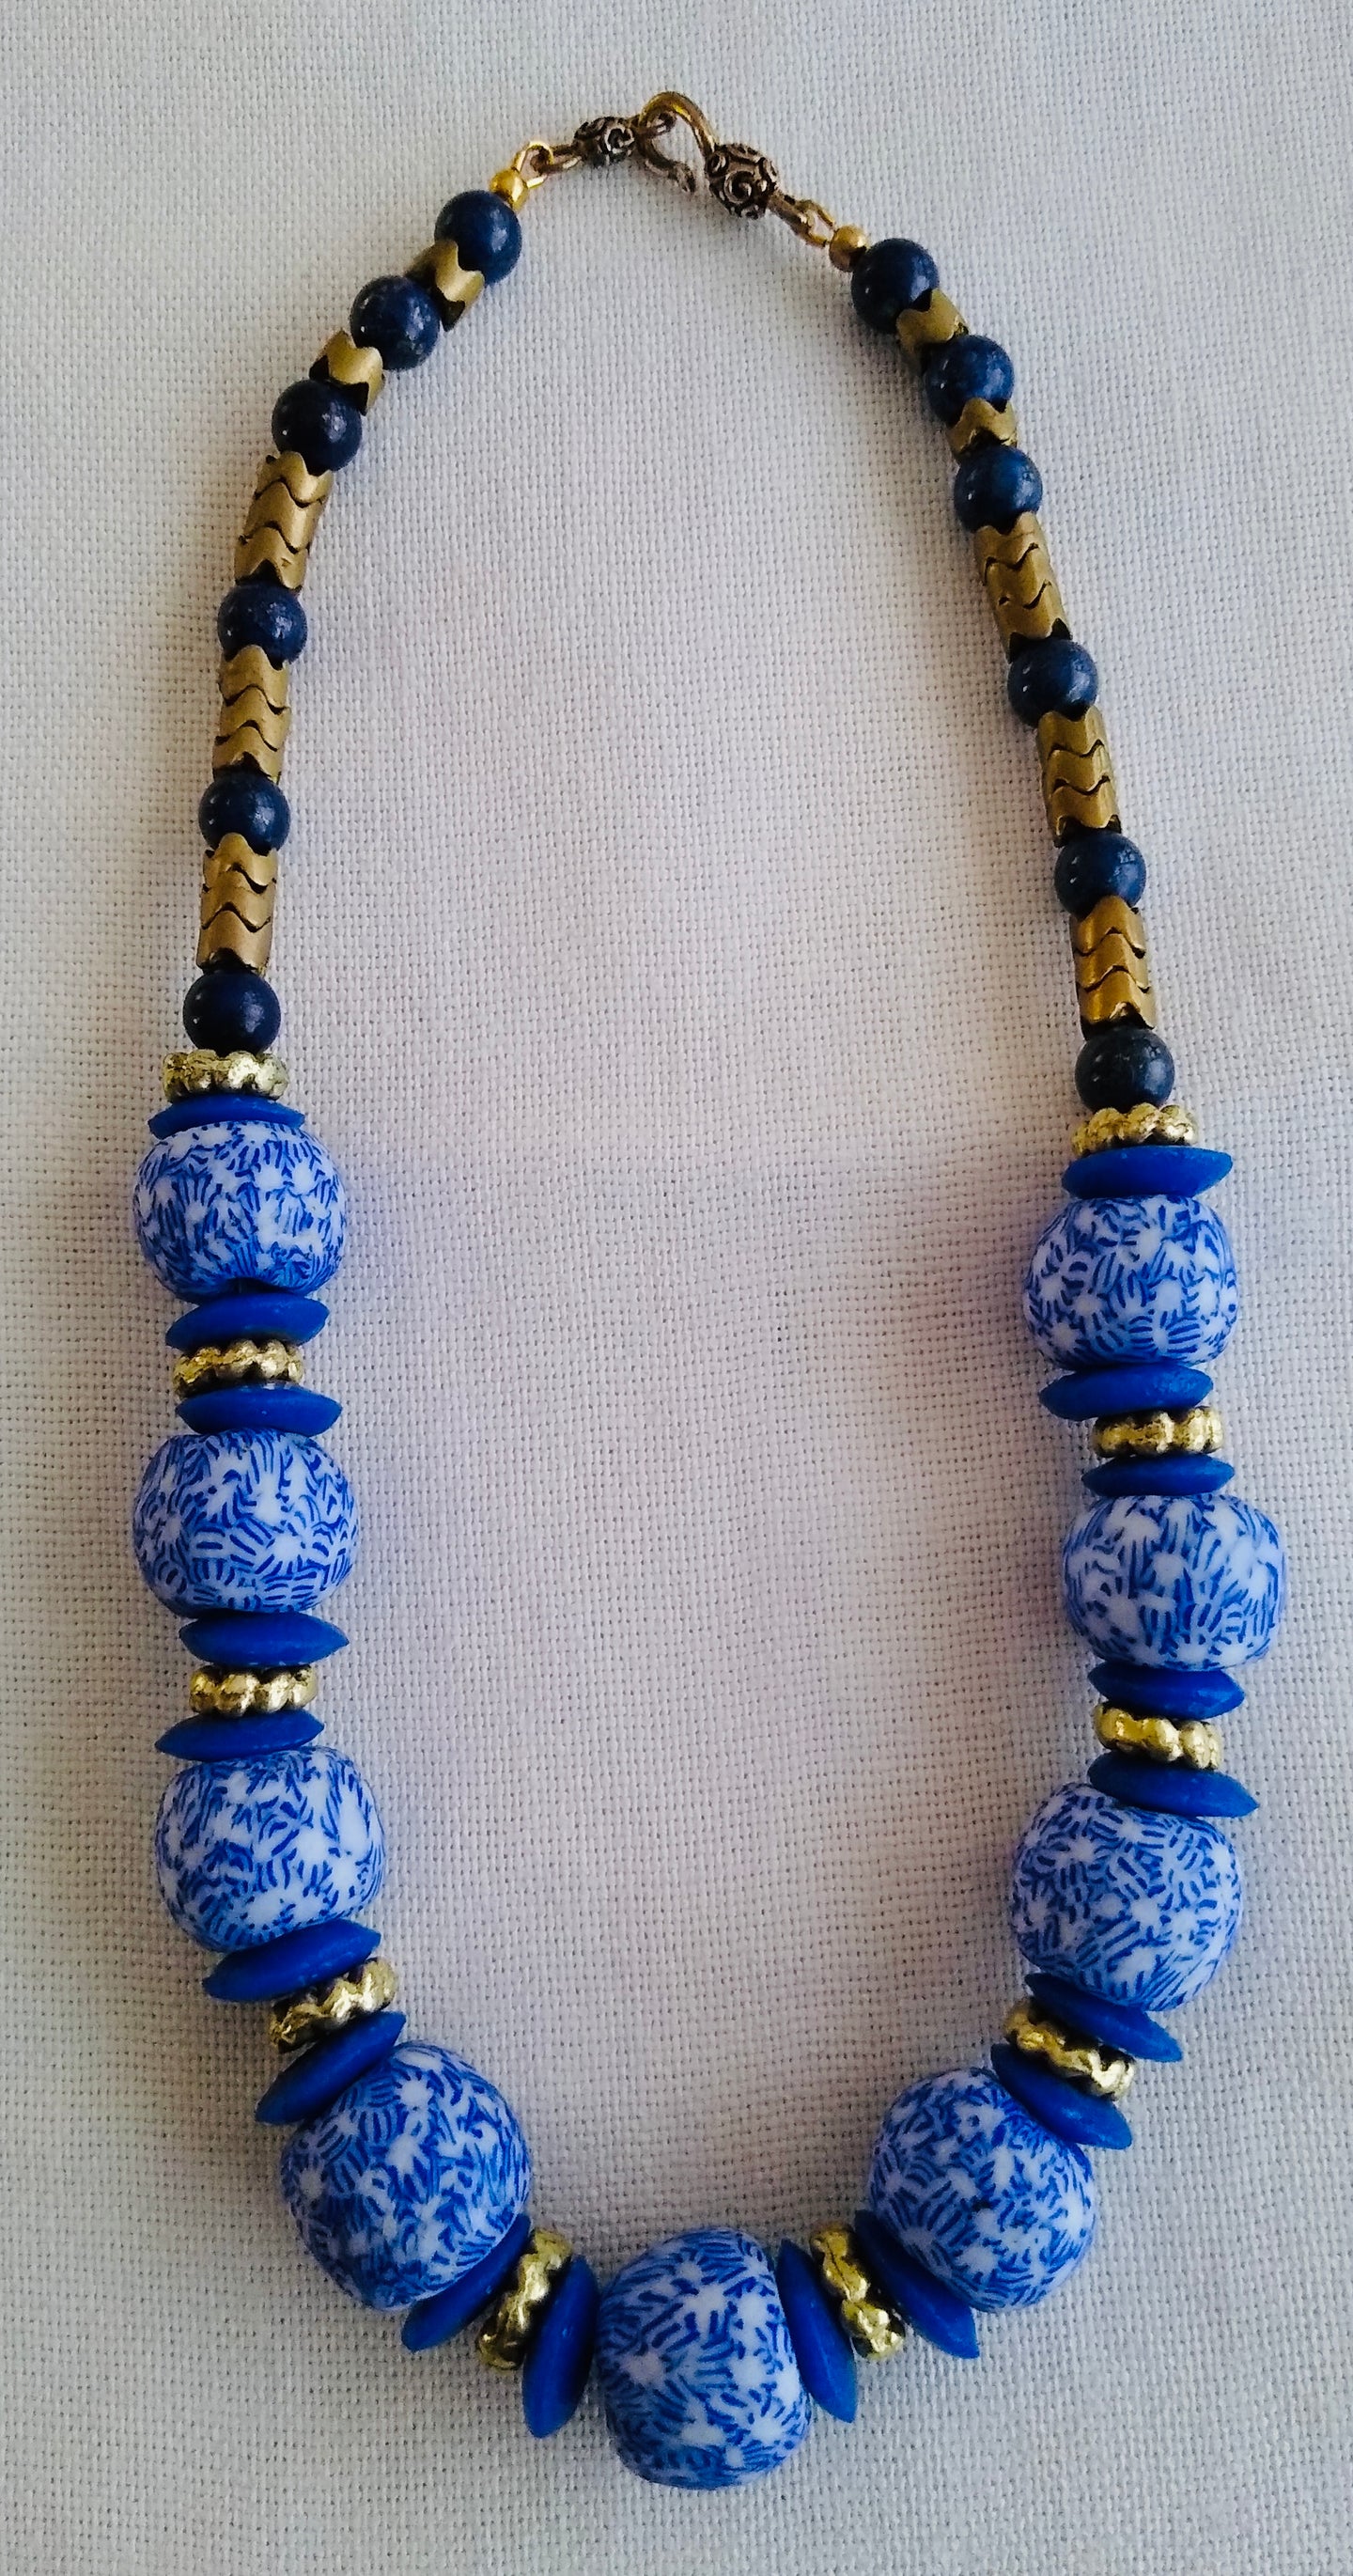 New ! Tania Snihur blue,white recycled fused glass bead necklace necklace #6